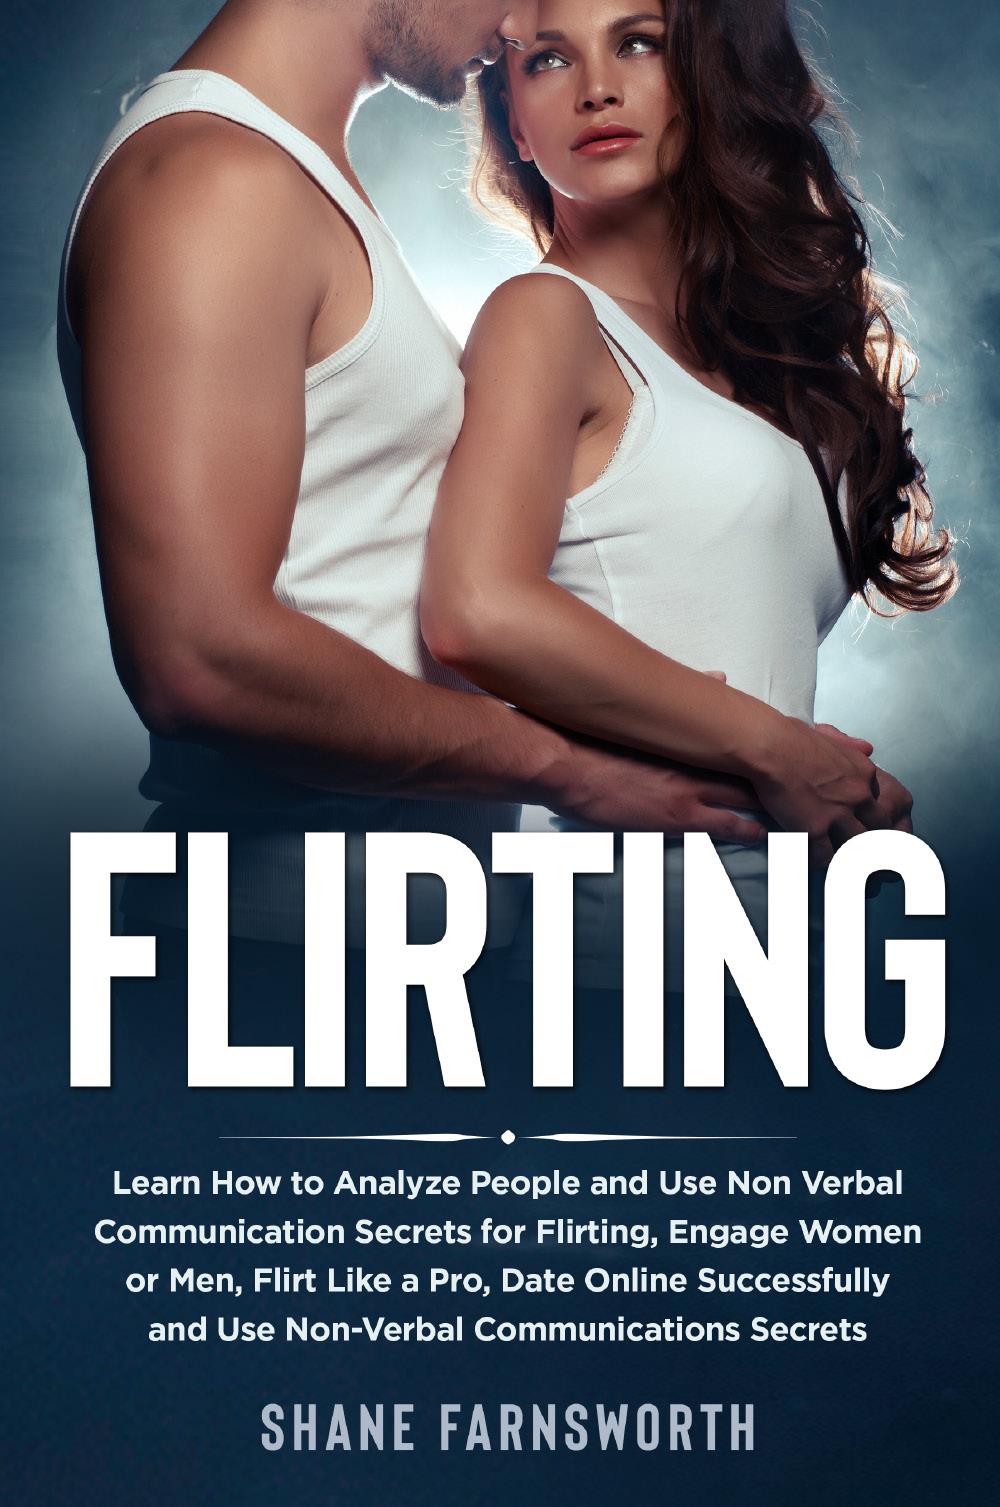 FLIRTING. Learn How to Analyze People and Use Non Verbal Communication Secrets for Flirting, Engage Women or Men, Flirt Like a Pro, Date Online Successfully and Use Non-Verbal Communications Secrets